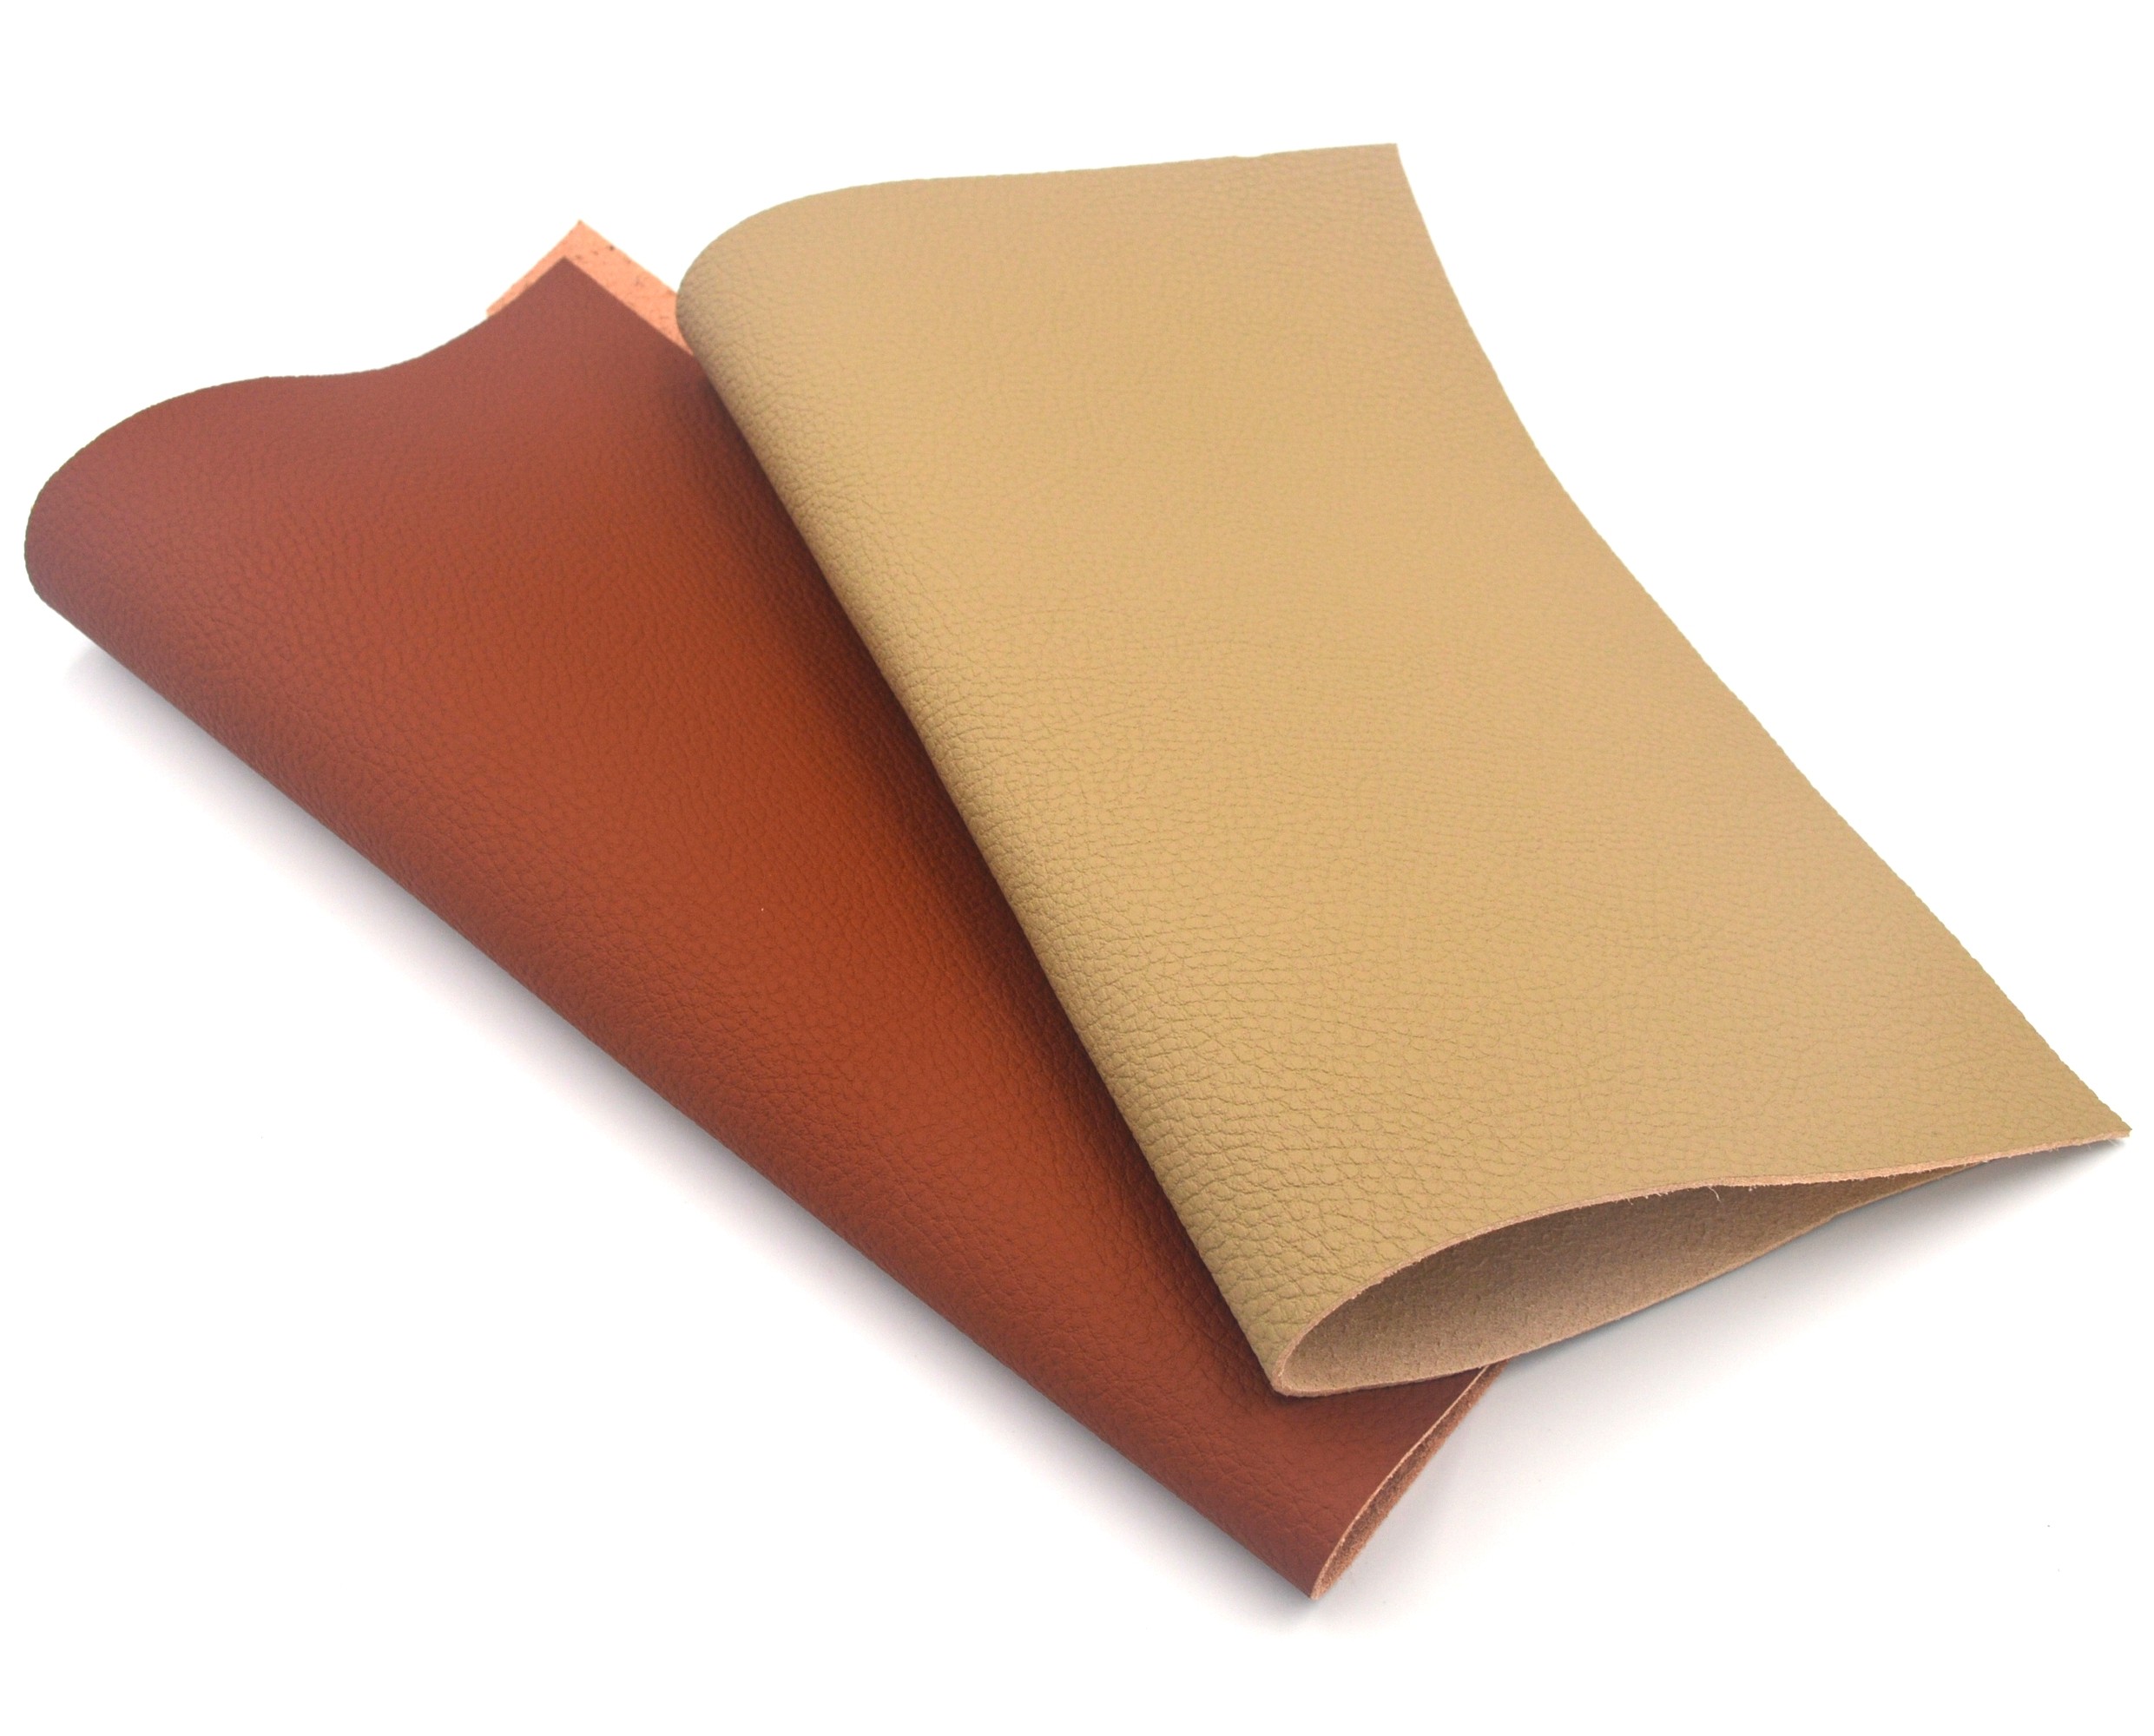 1.4mm lychee grain microfiber leather for car seat covers